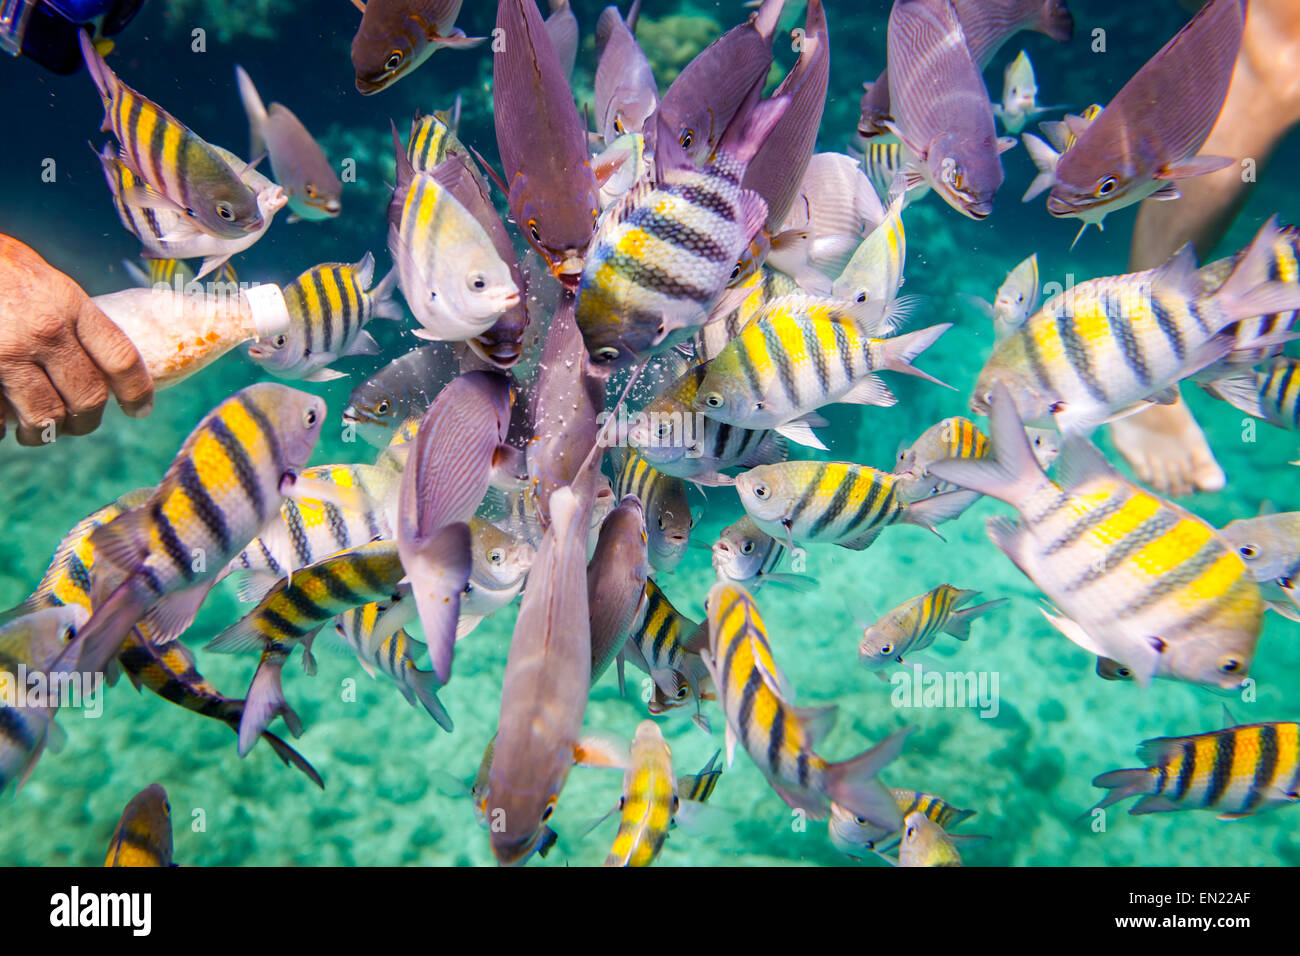 Man feeds the tropical fish under water.Ocean coral reef. Warning - authentic shooting underwater in challenging conditions. A l Stock Photo